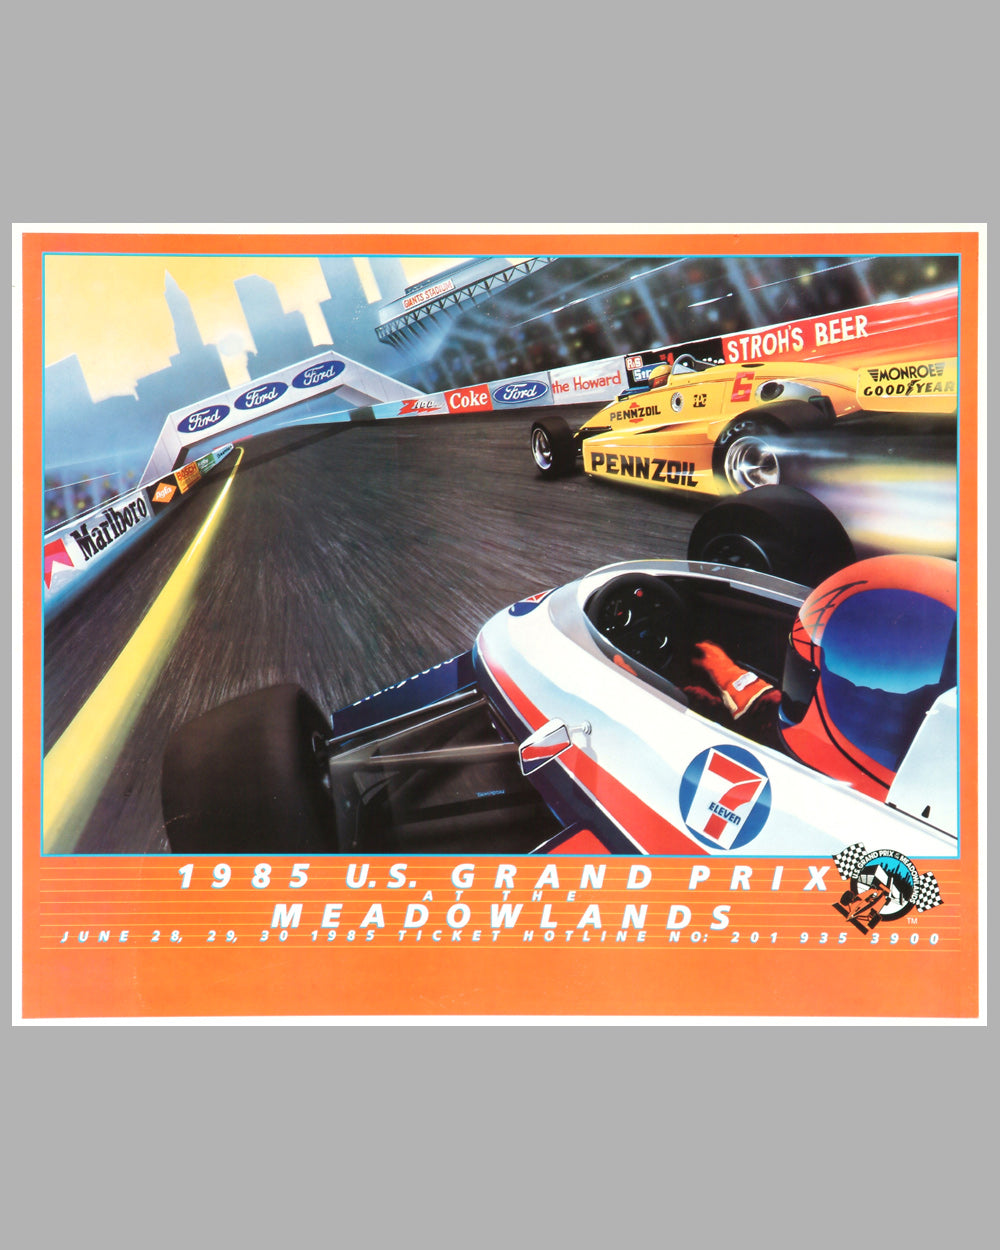 1985 GP of USA Meadowlands official event poster by Thierry Thompson